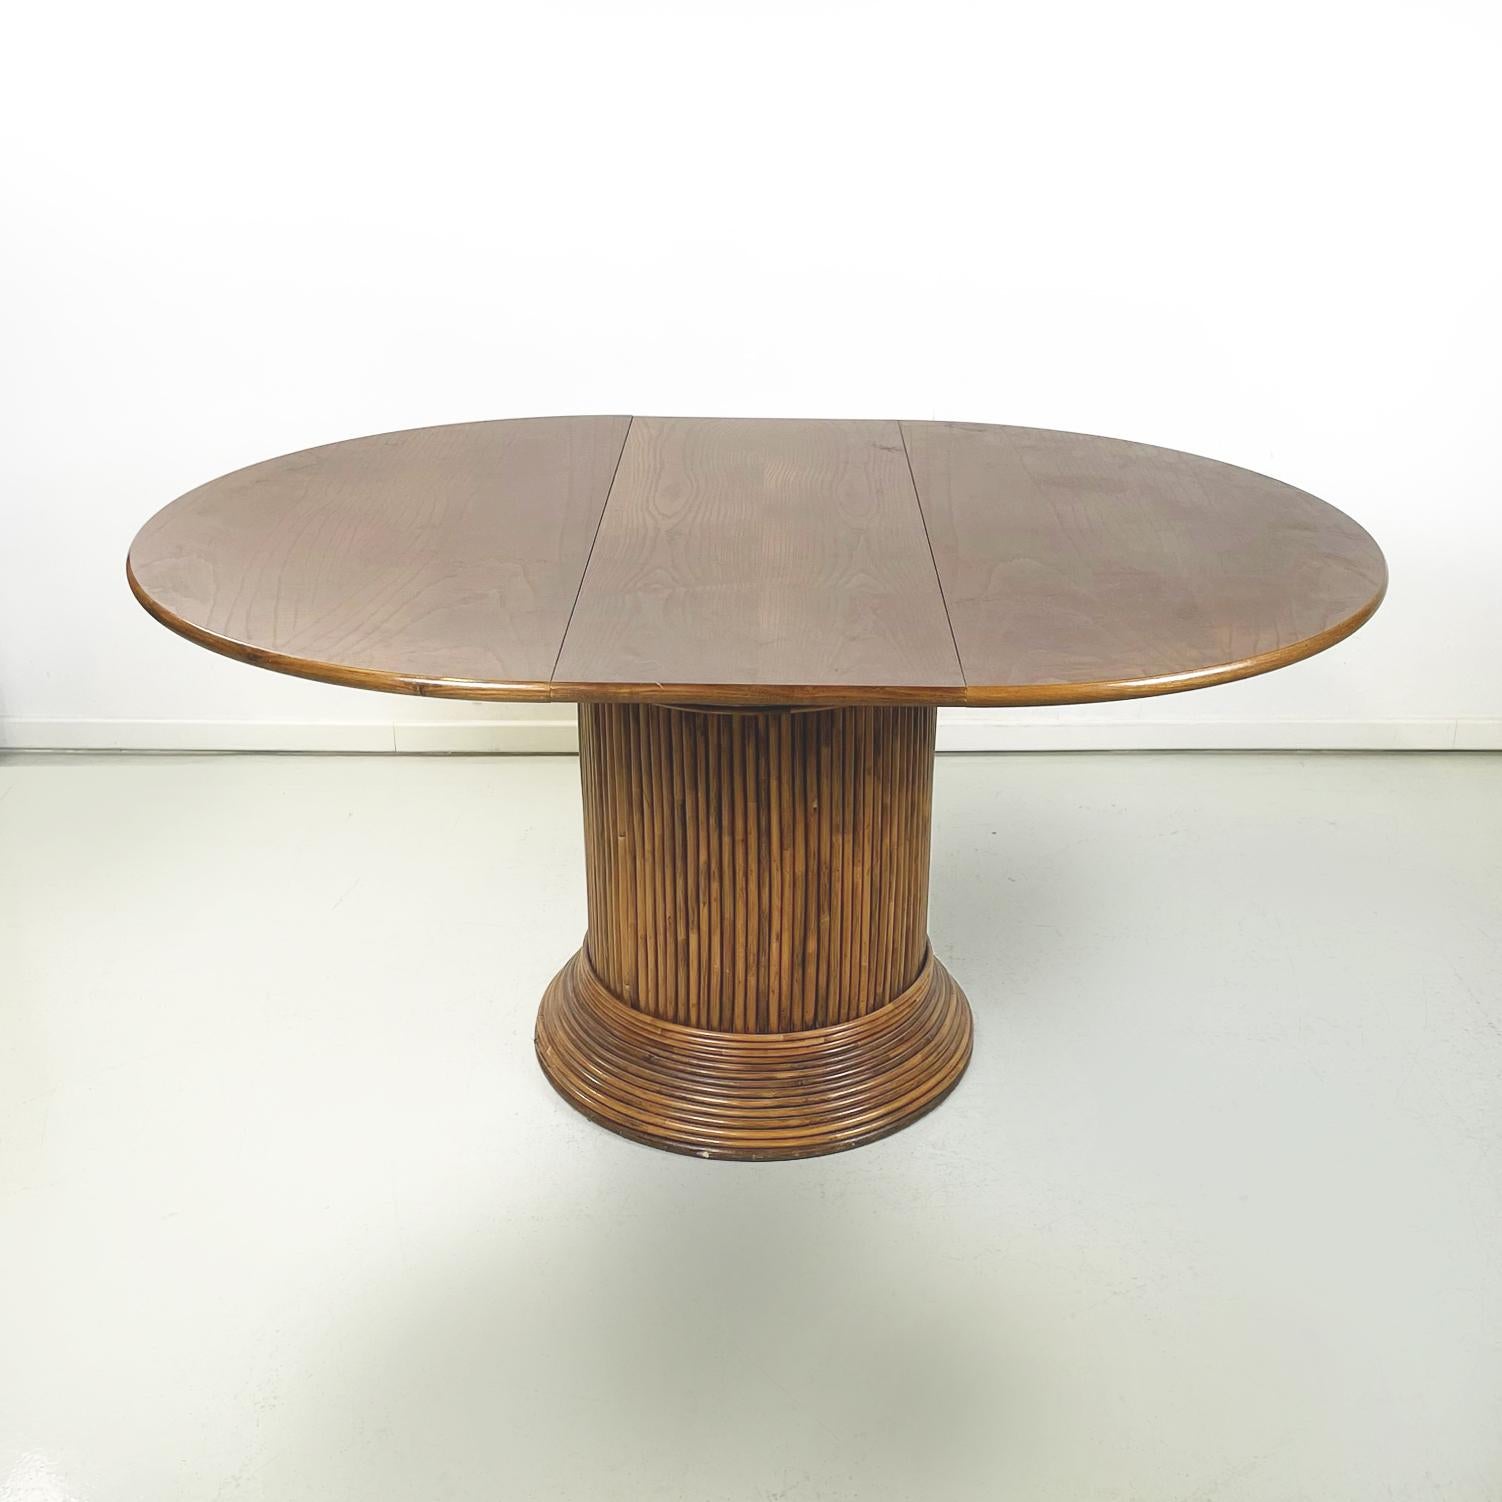 Italian mid-century Round or oval wooden dining table with extensions, 1960s
Dining table with extensions, in wood. The top can be round or, adding the central extension, oval. The round base is in bamboo slats.
1960s.
Good general condition, it has